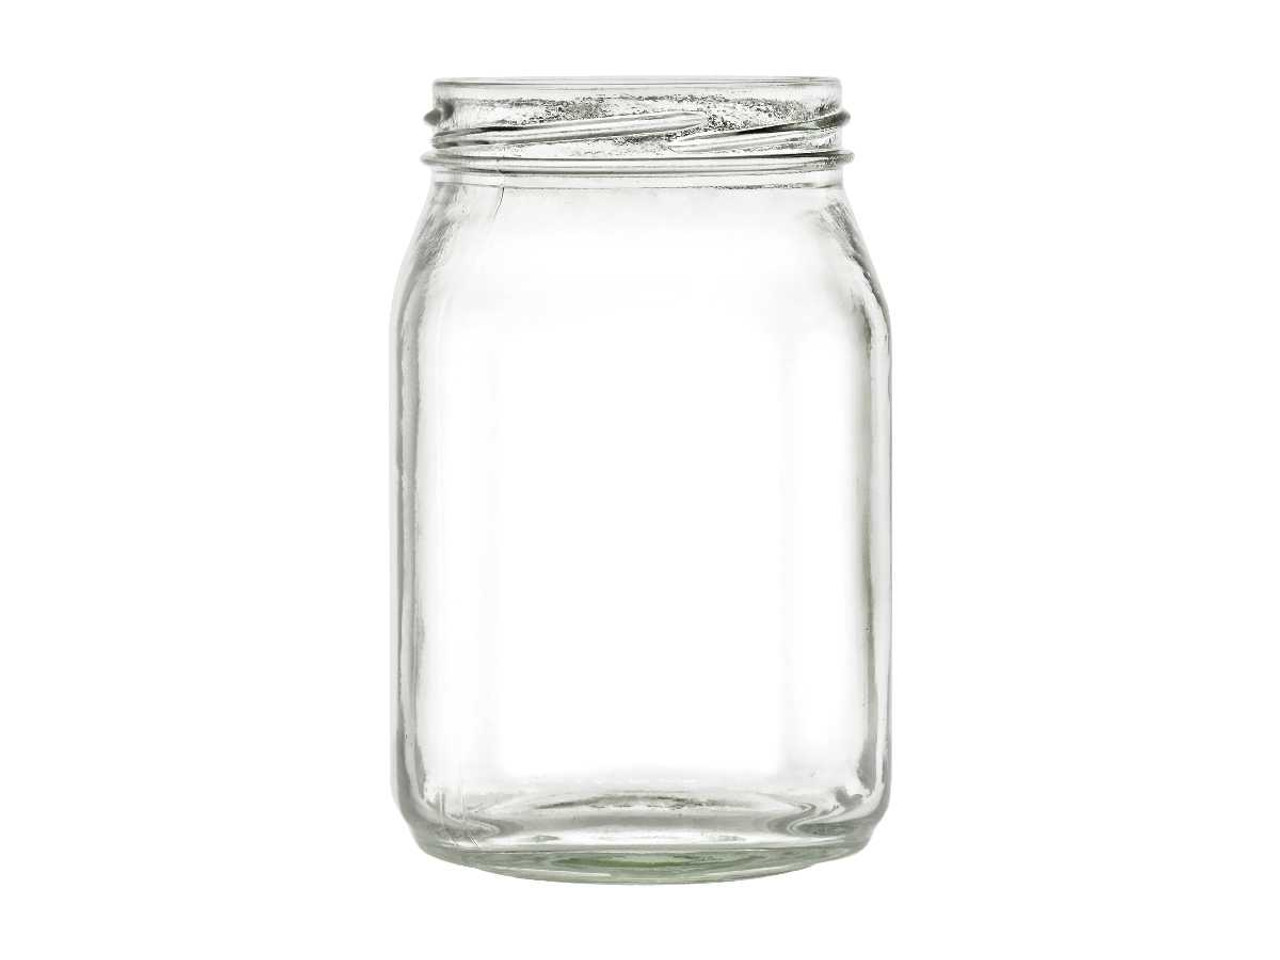 16 oz Victorian Square Glass Jar with Lid - Made in Europe